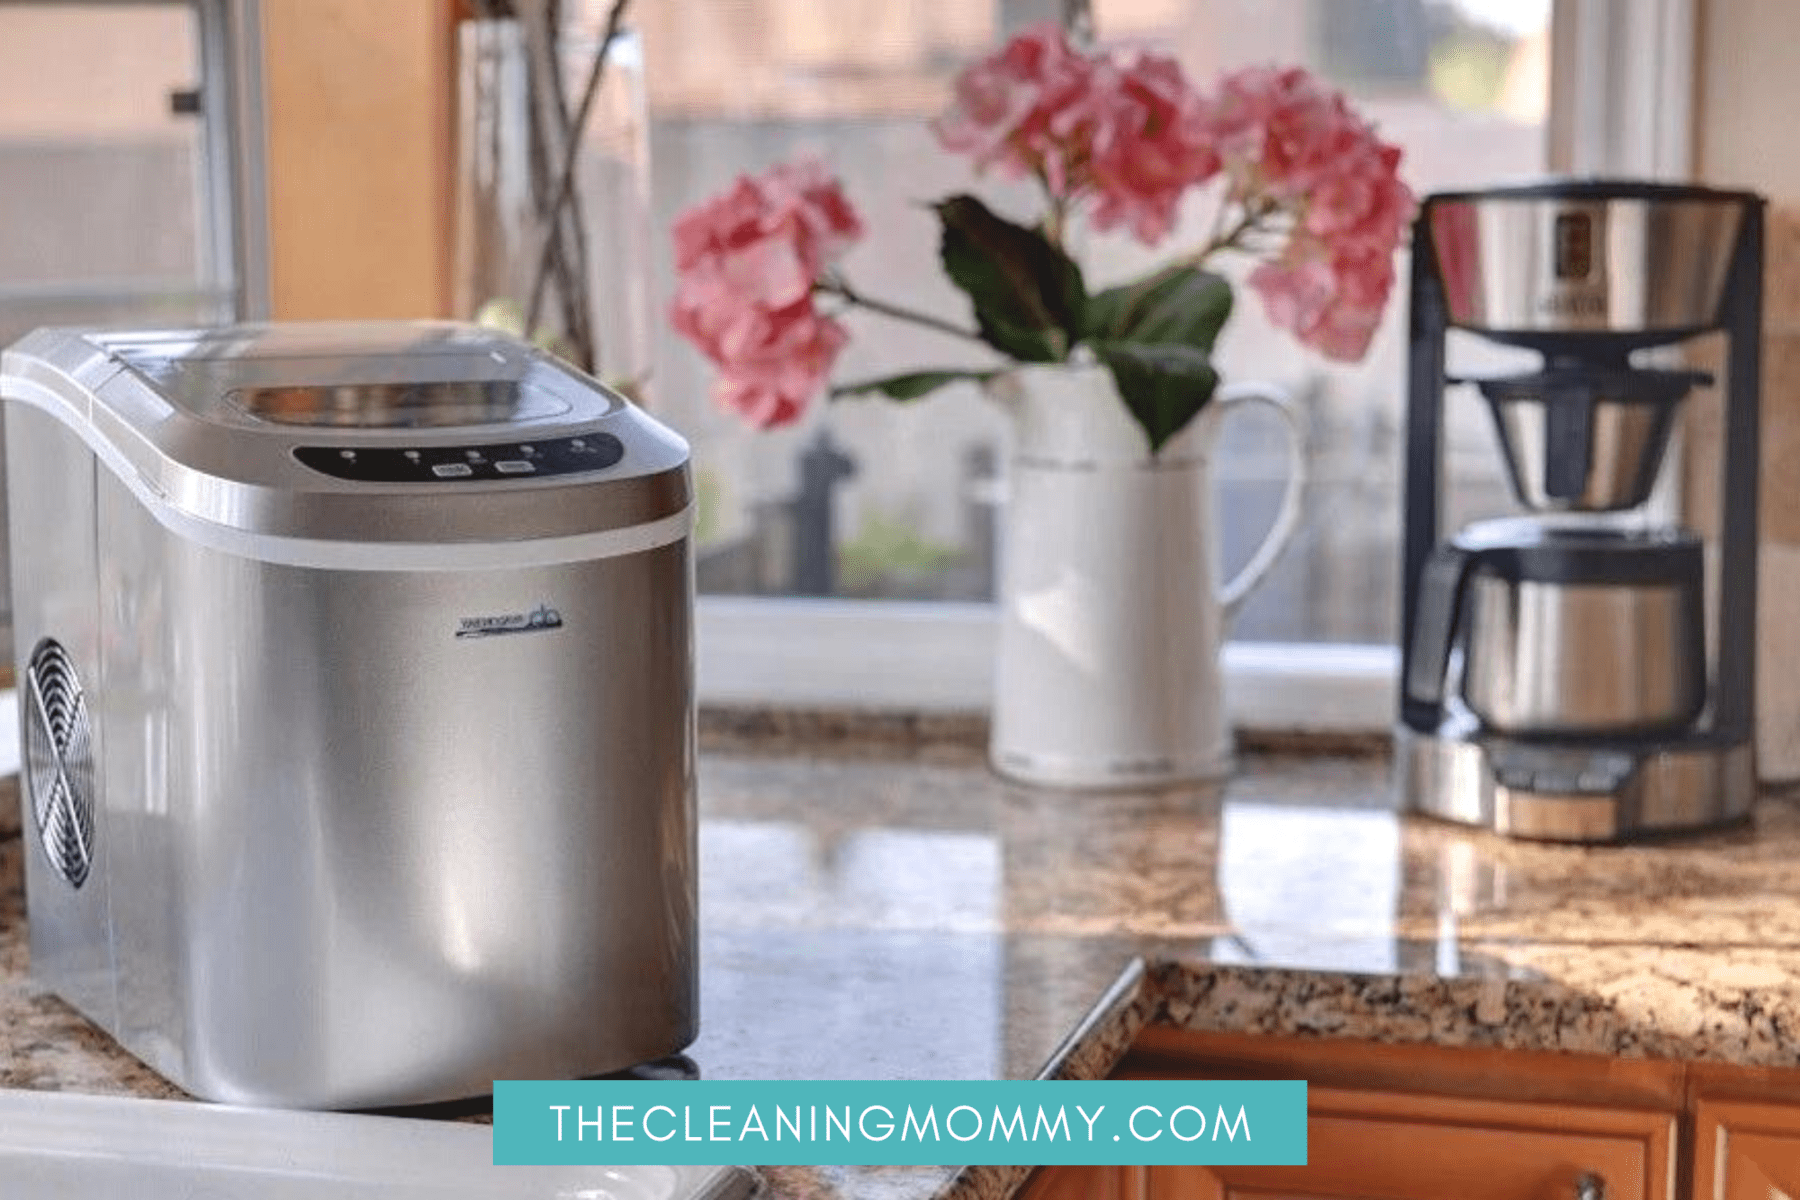 stainless steel countertop ice maker with pink flowers behind